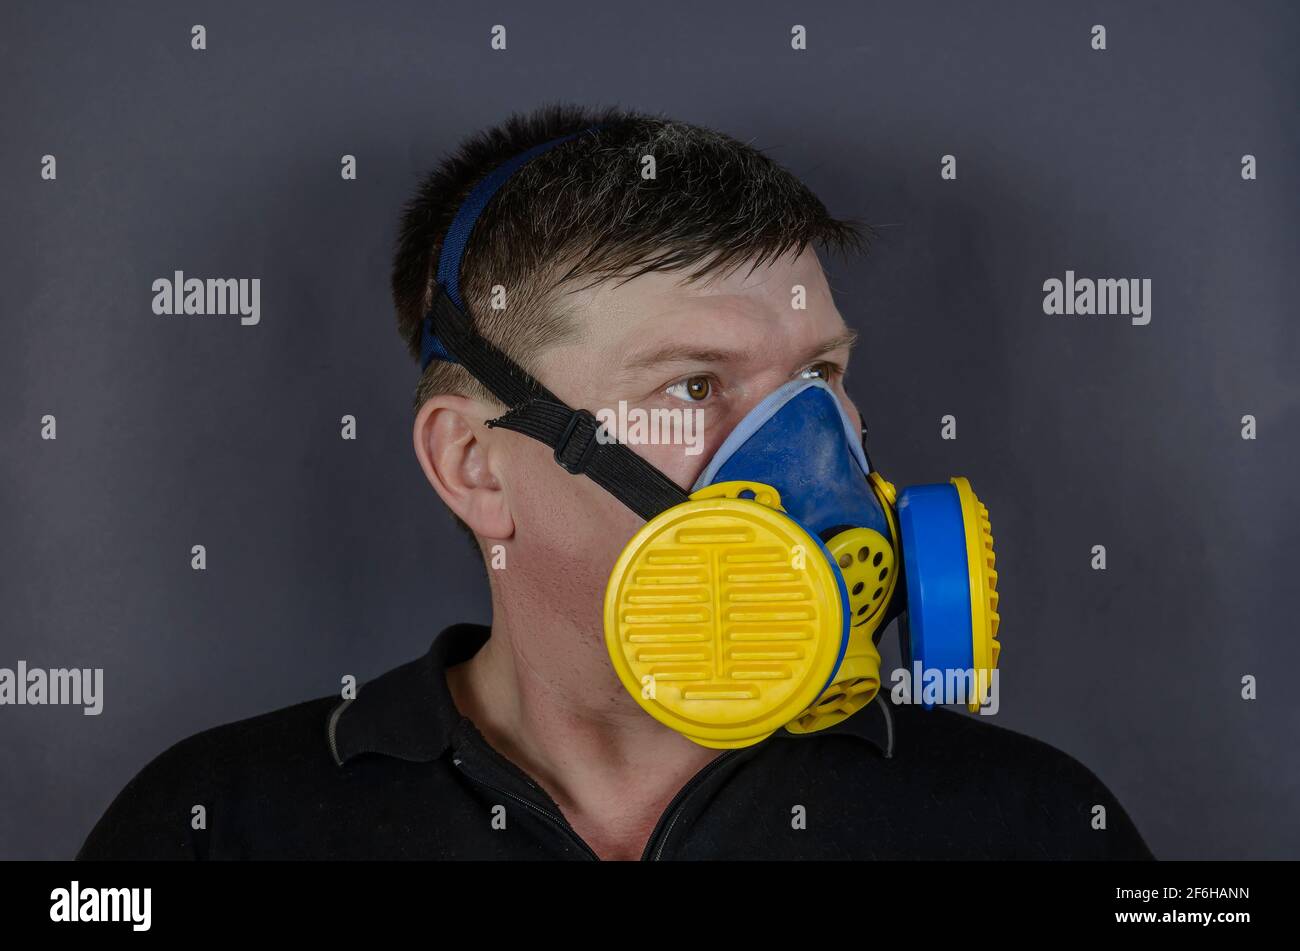 Portrait of a man in an industrial respirator on a gray background. An adult male with short hair wearing a blue and yellow respirator. Half mask with Stock Photo